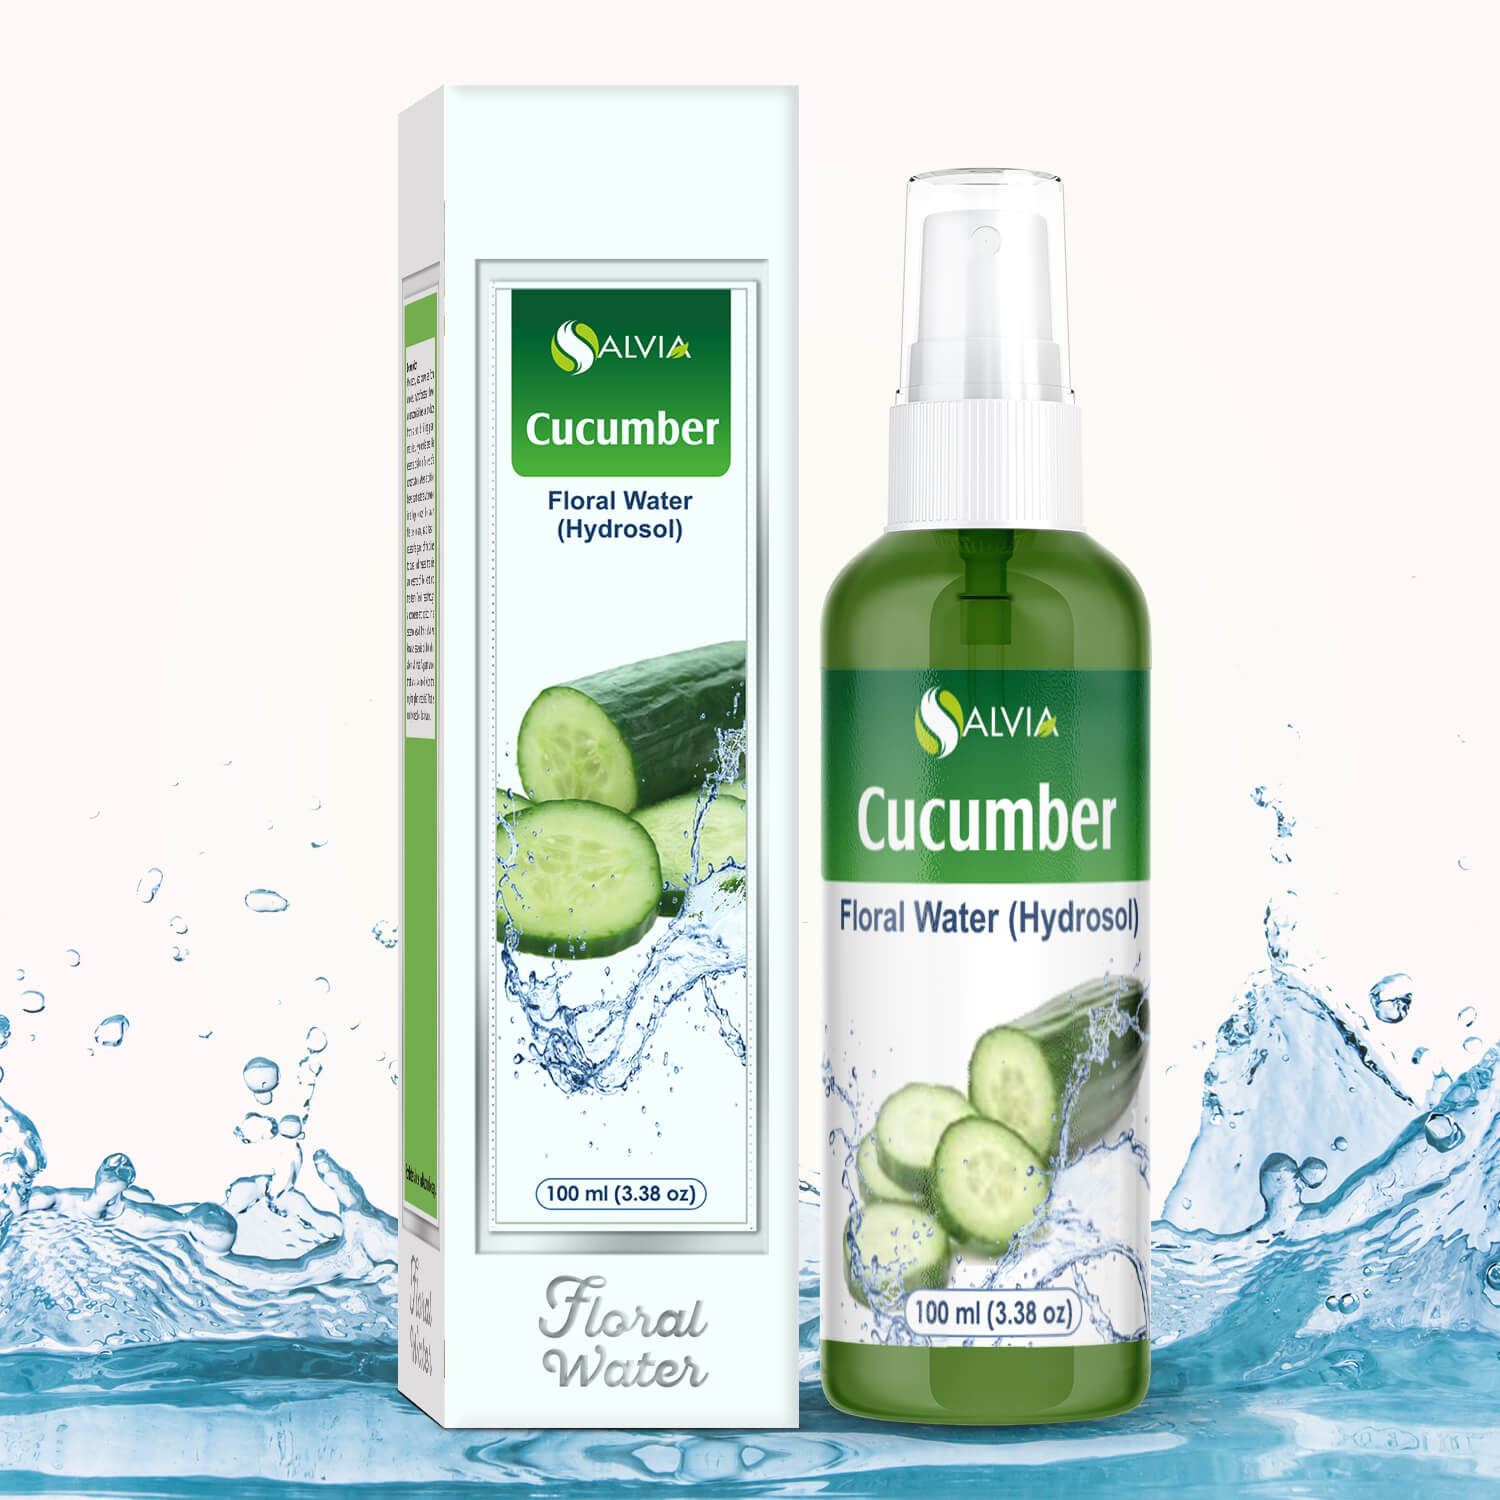 Salvia Floral Water 100 ml Cucumber ( Cucumis sativus) Floral Water Hydrosol 100% Pure And Natural